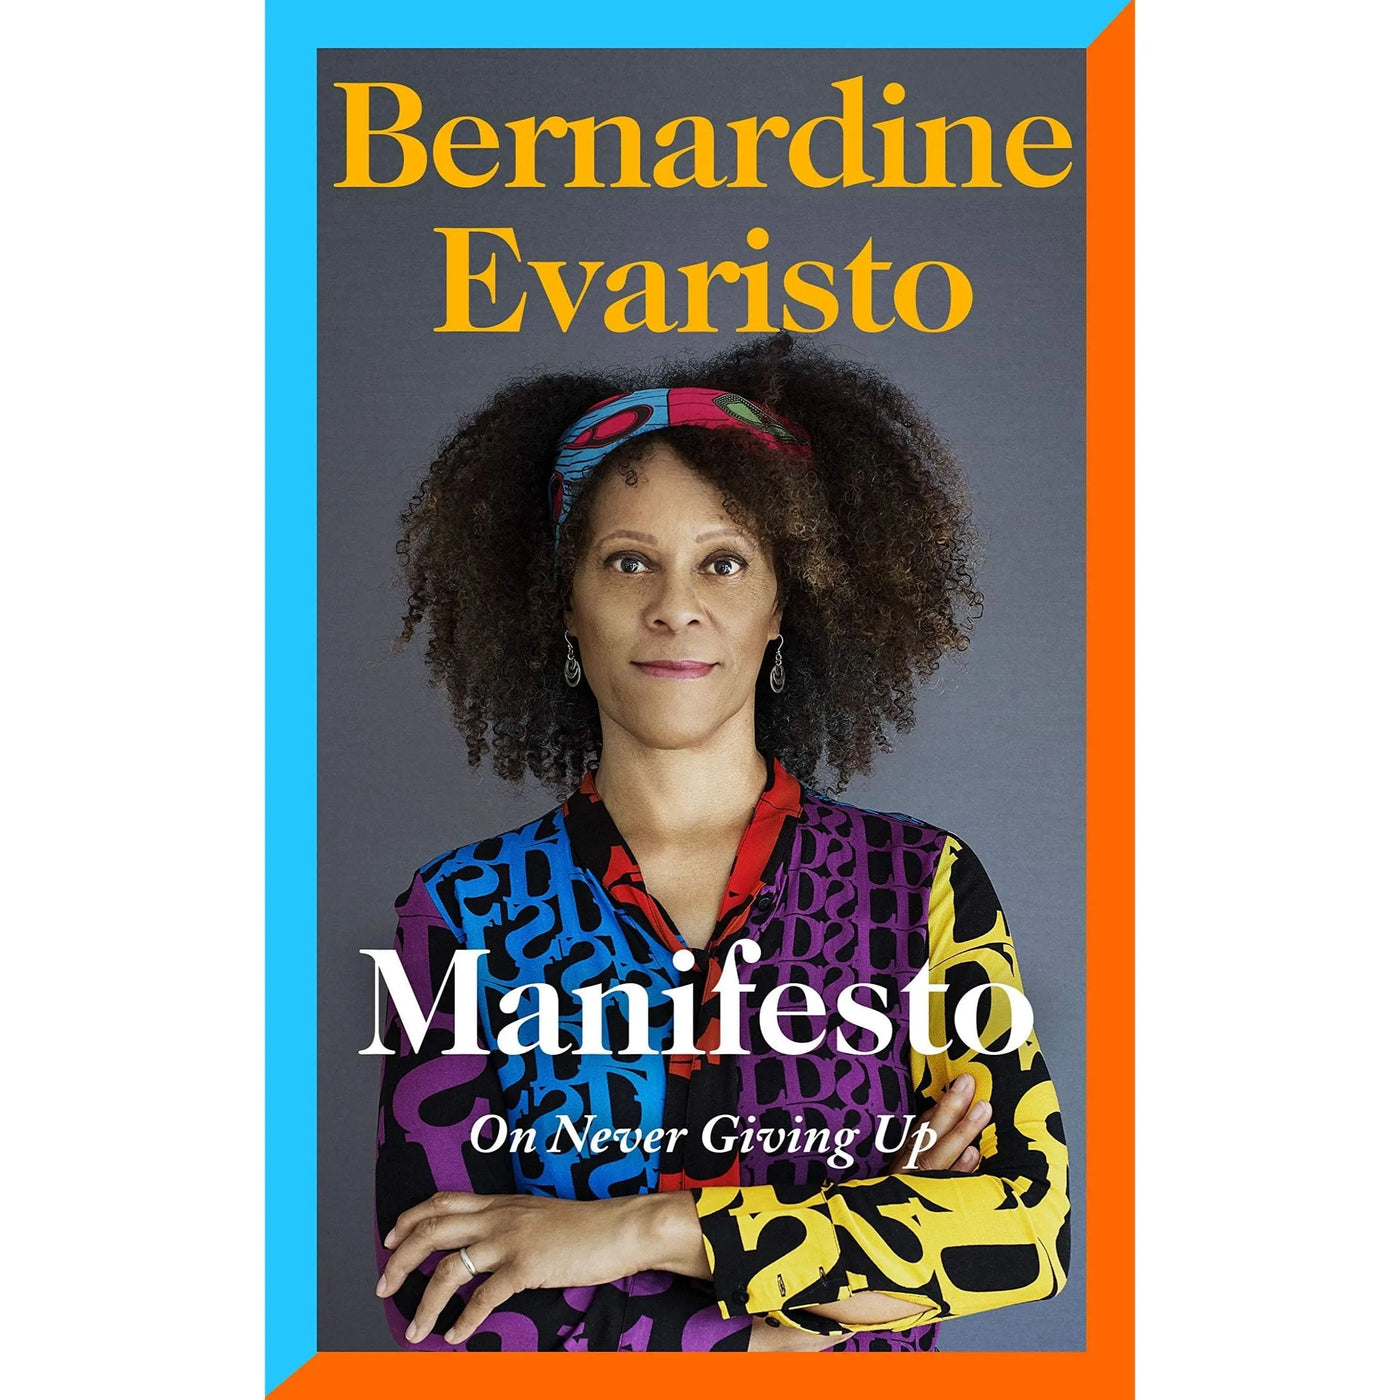 Bernadine Evaristo: Manifesto: A rallying cry to never give up - Migration Museum Shop